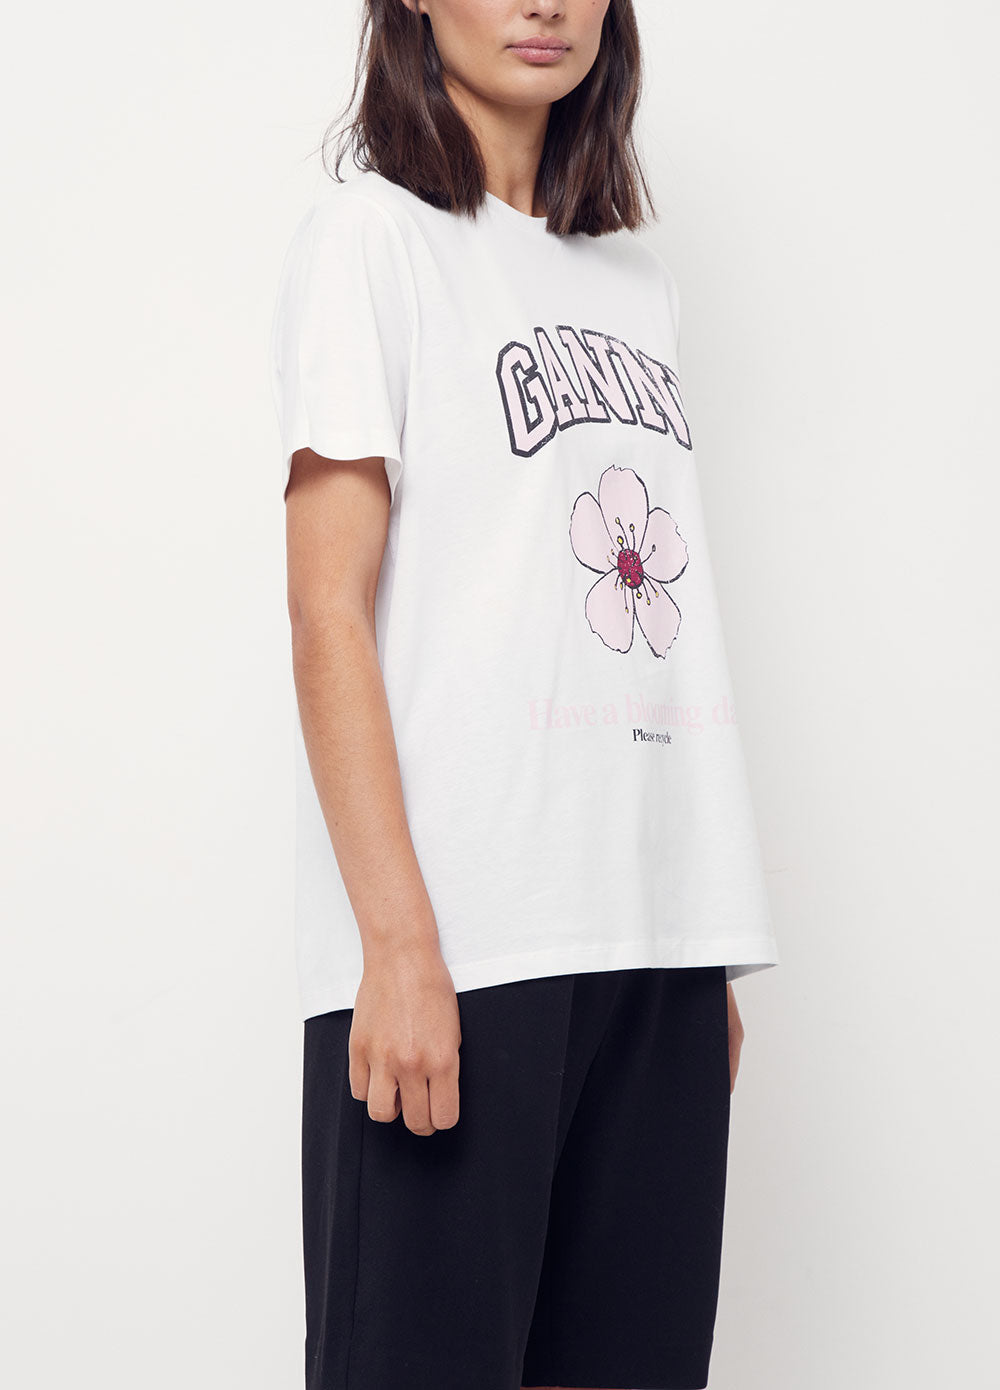 How Are U Bloom T-shirt